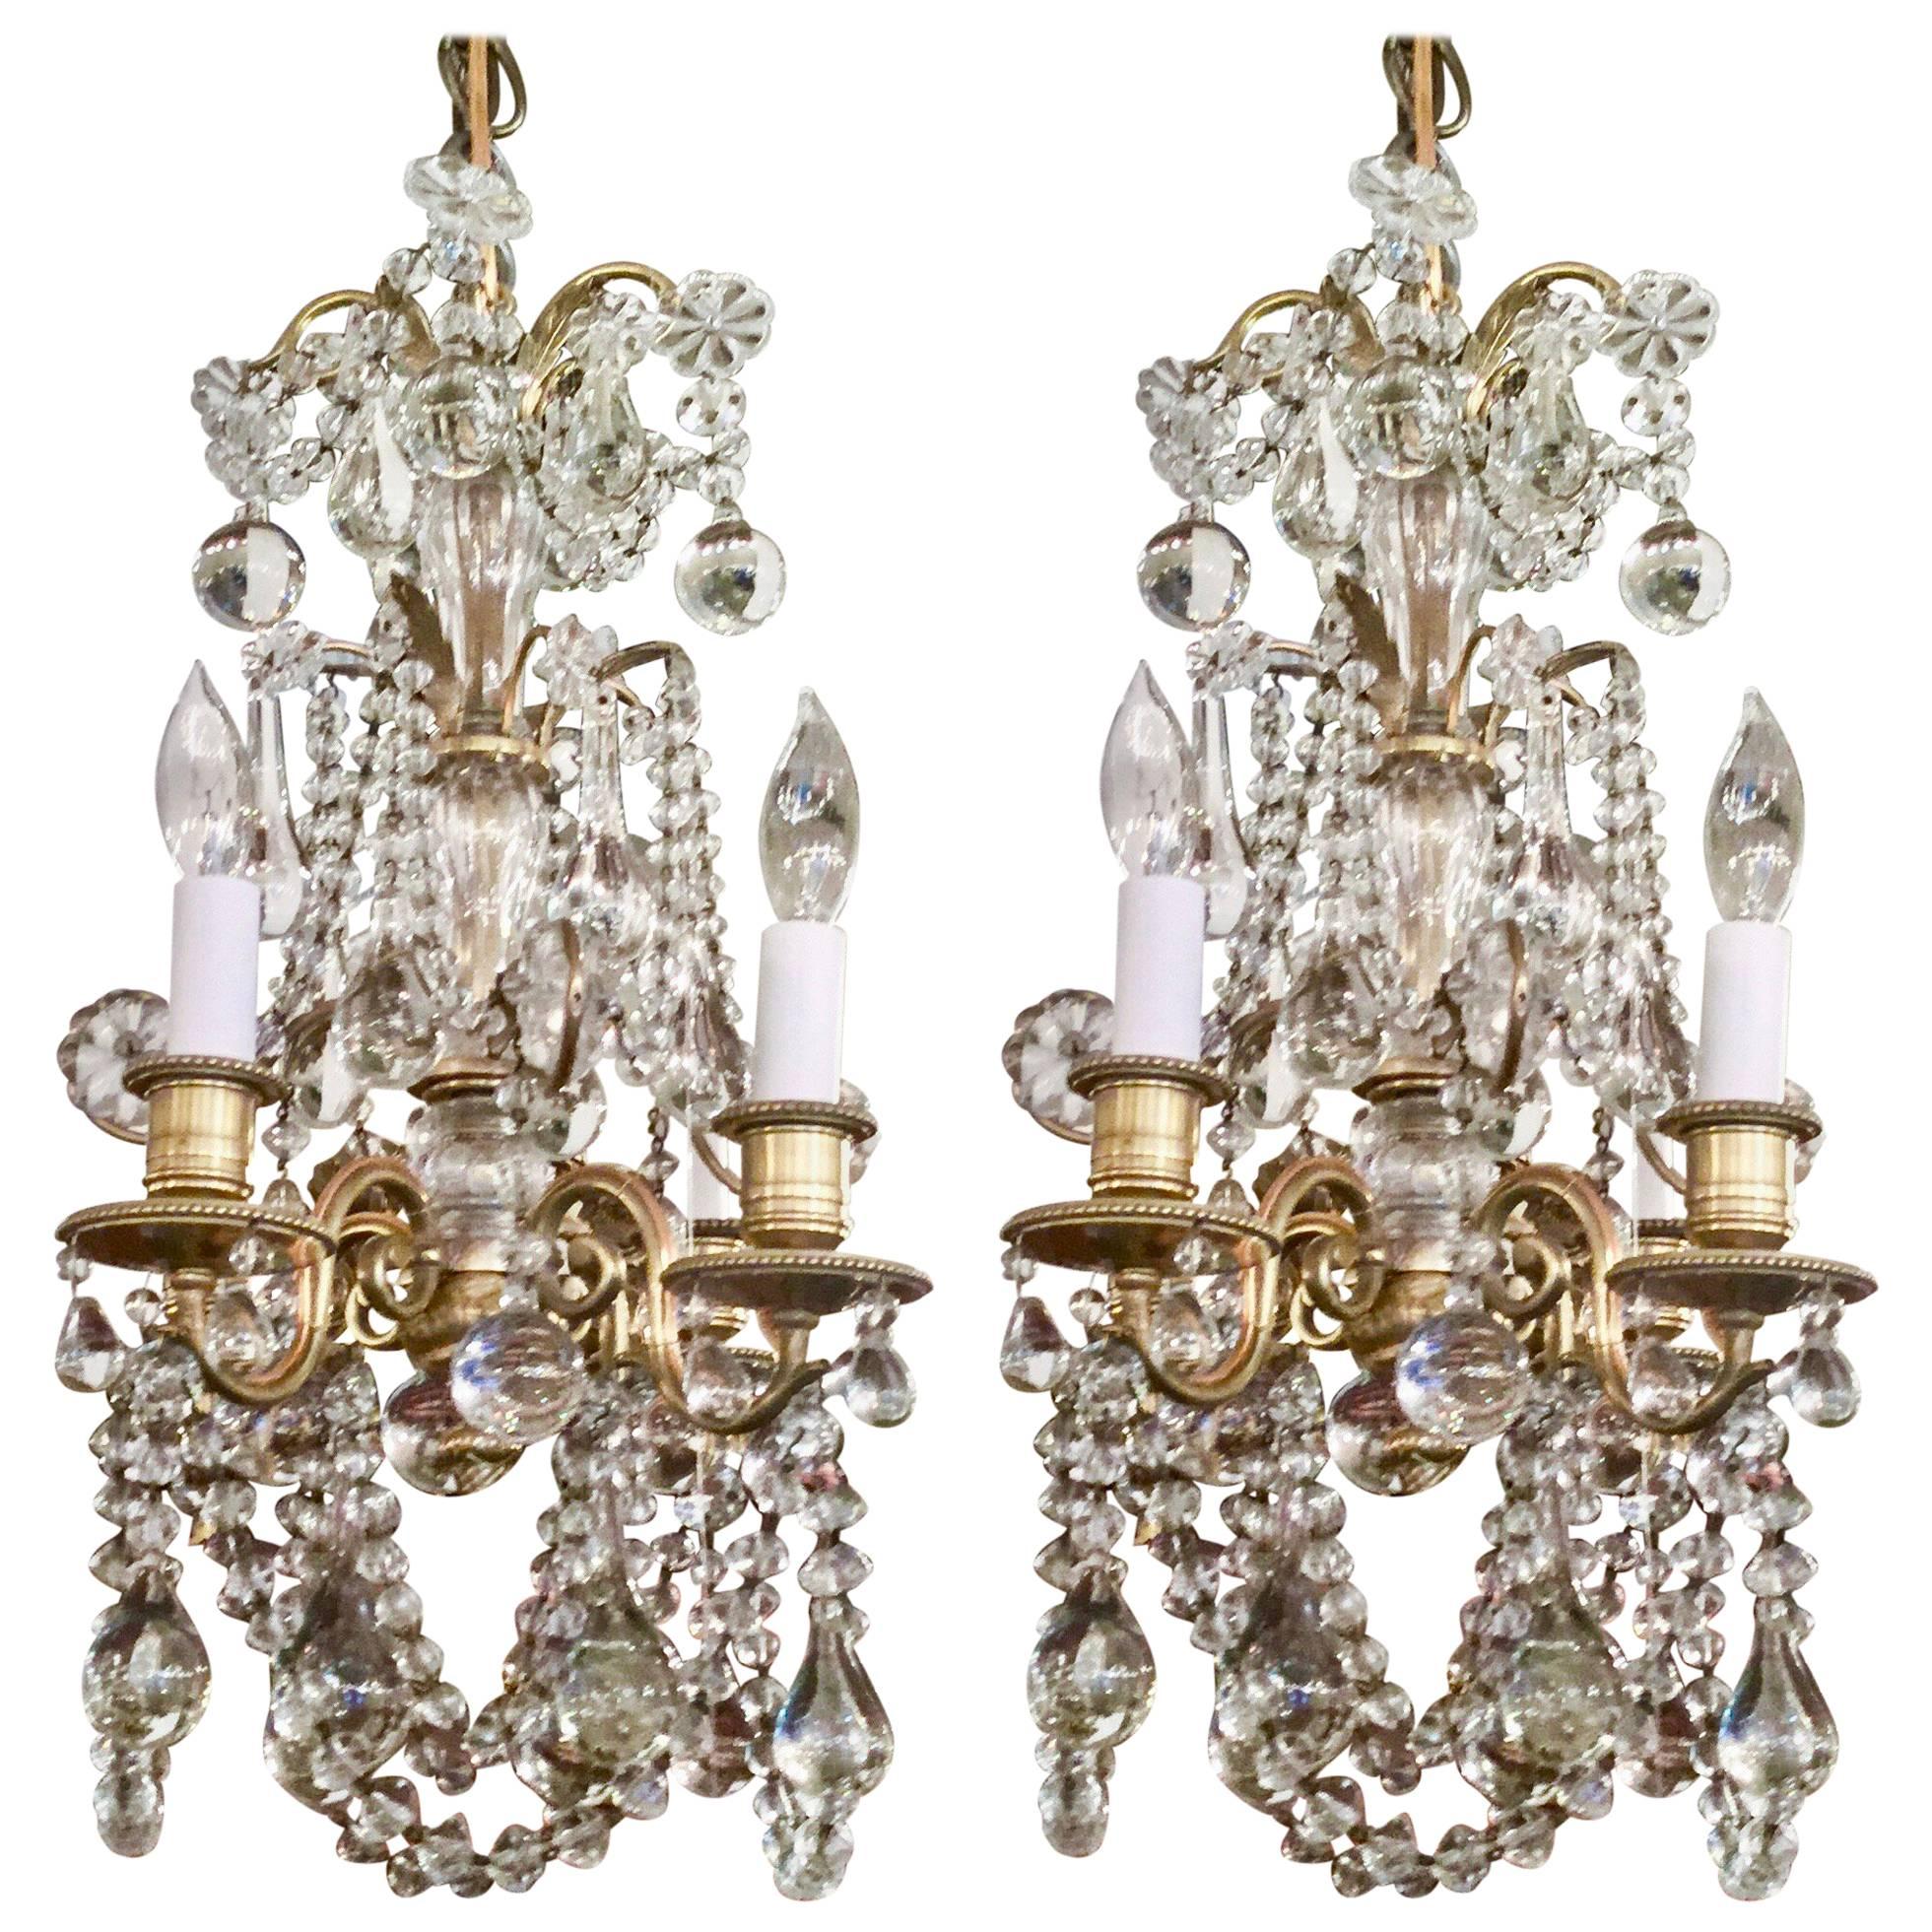 Pair of Antique French Bronze Doré and Baccarat Crystal Chandeliers, circa 1880